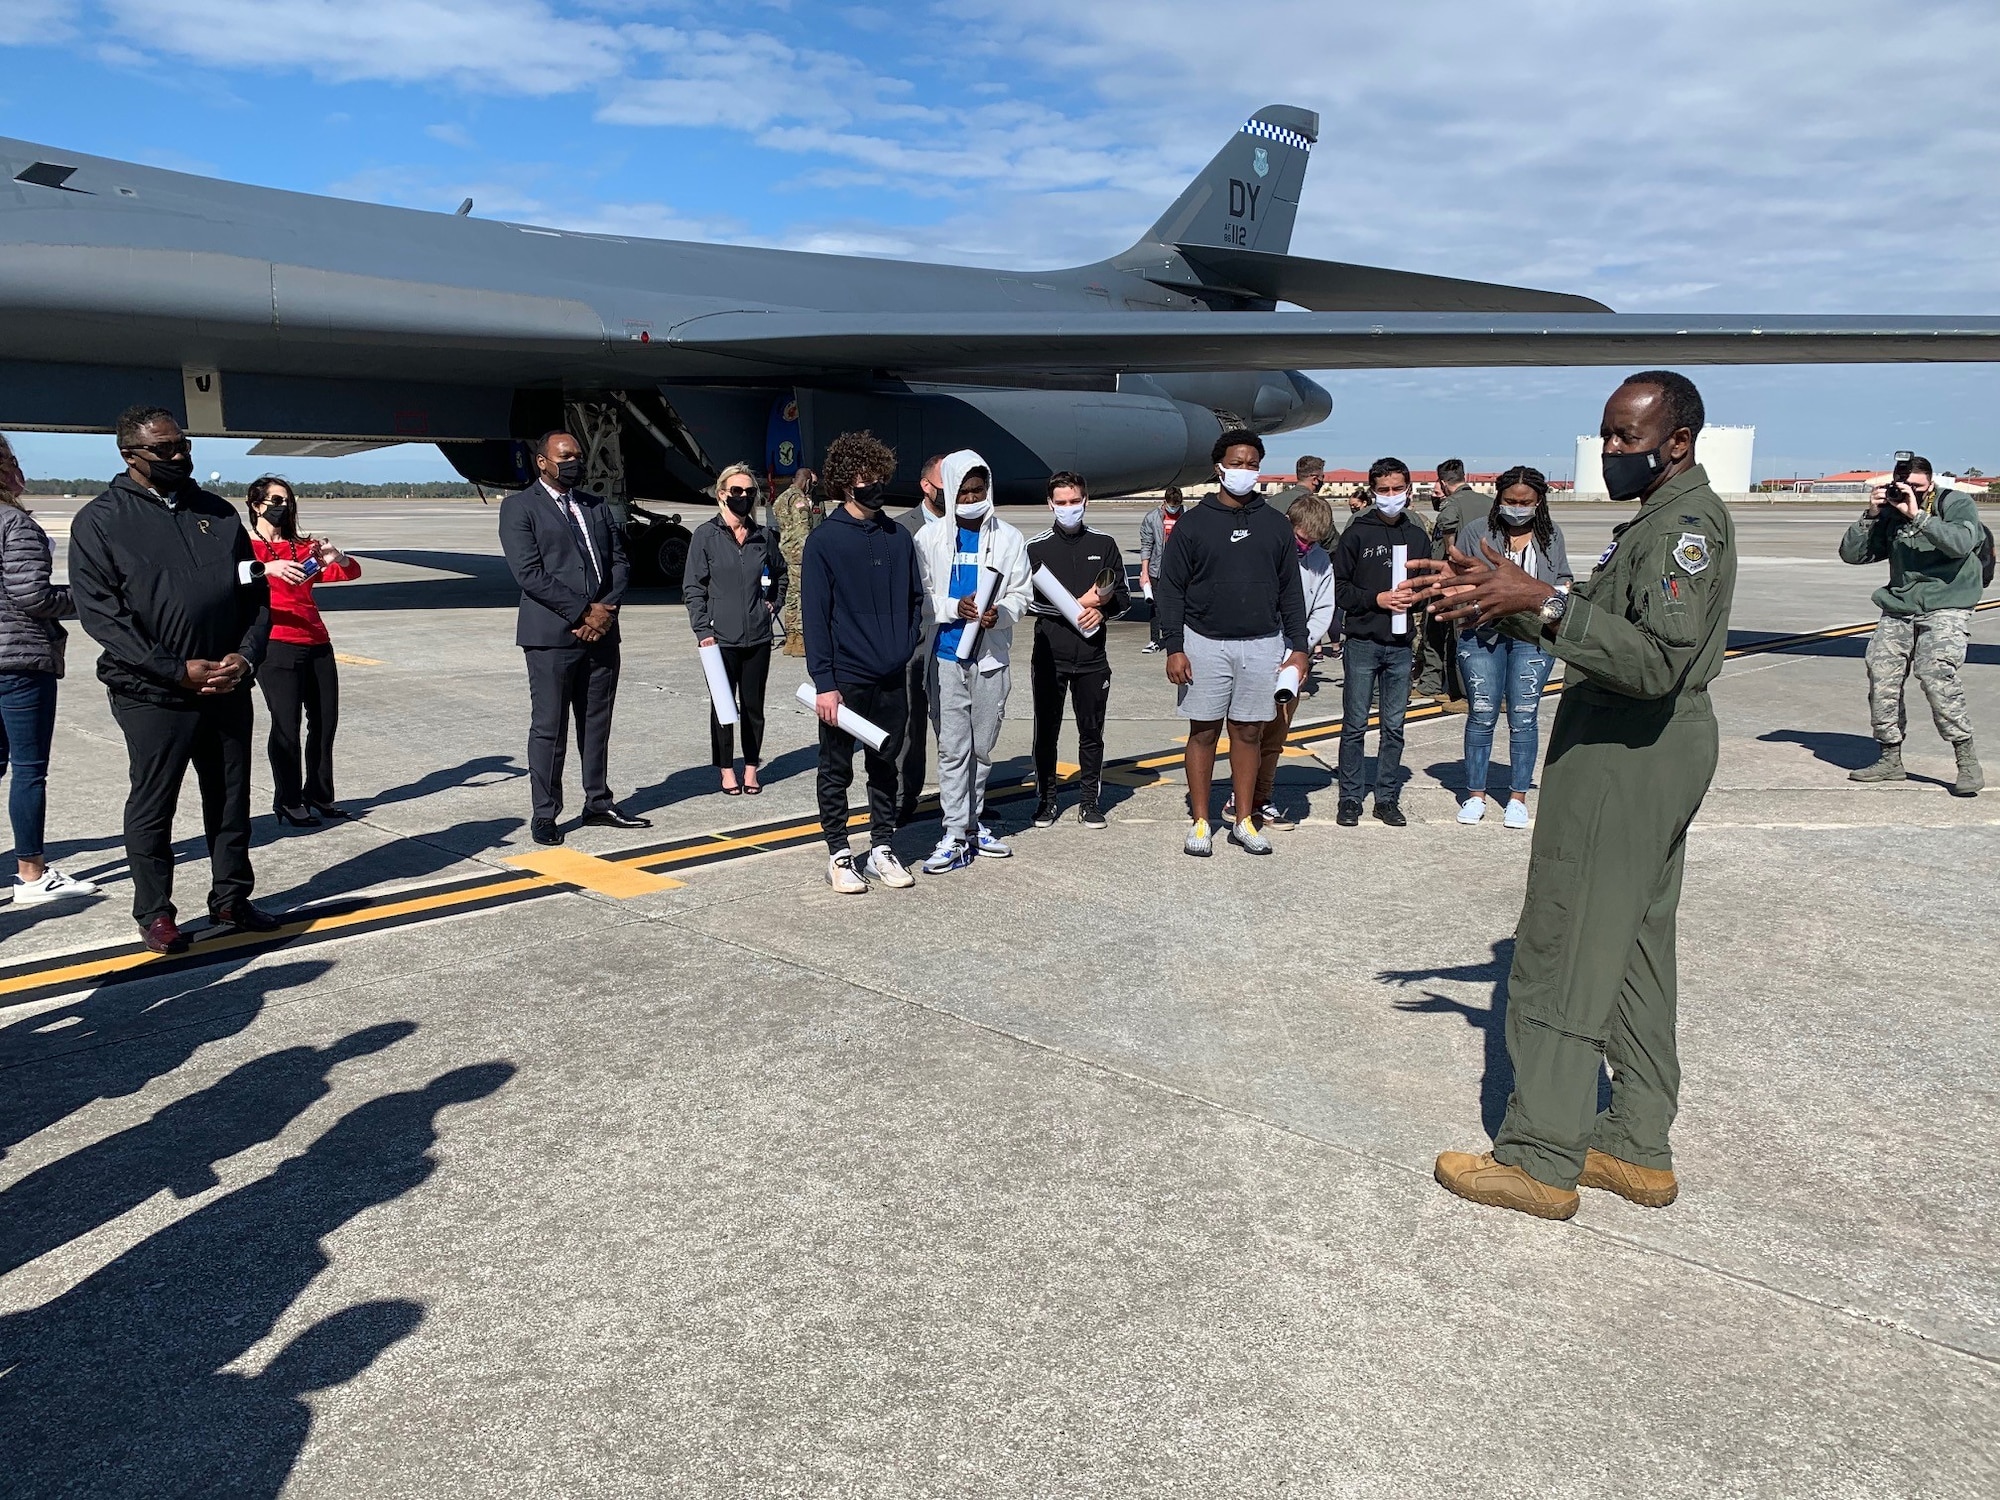 Air Force Col. Travis Edwards, 6th Operations Group commander, briefs Tampa Bay students on the MacDill Air Force Base, Florida flight line during a tour of a B-1B Lancer bomber and KC-135 Stratotanker aircraft Feb. 5, 2021. The students visited MacDill AFB to learn about the Air Force aircraft scheduled to fly over Raymond James Stadium during Super Bowl LV. The tour provided both male and female students from diverse multi-ethnic backgrounds in the community the opportunity to learn about the Air Force mission while sitting in the aircraft’s cockpit and visualizing themselves soaring at 35,000 feet in the air. (U.S. Air Force photo by Terry Montrose)